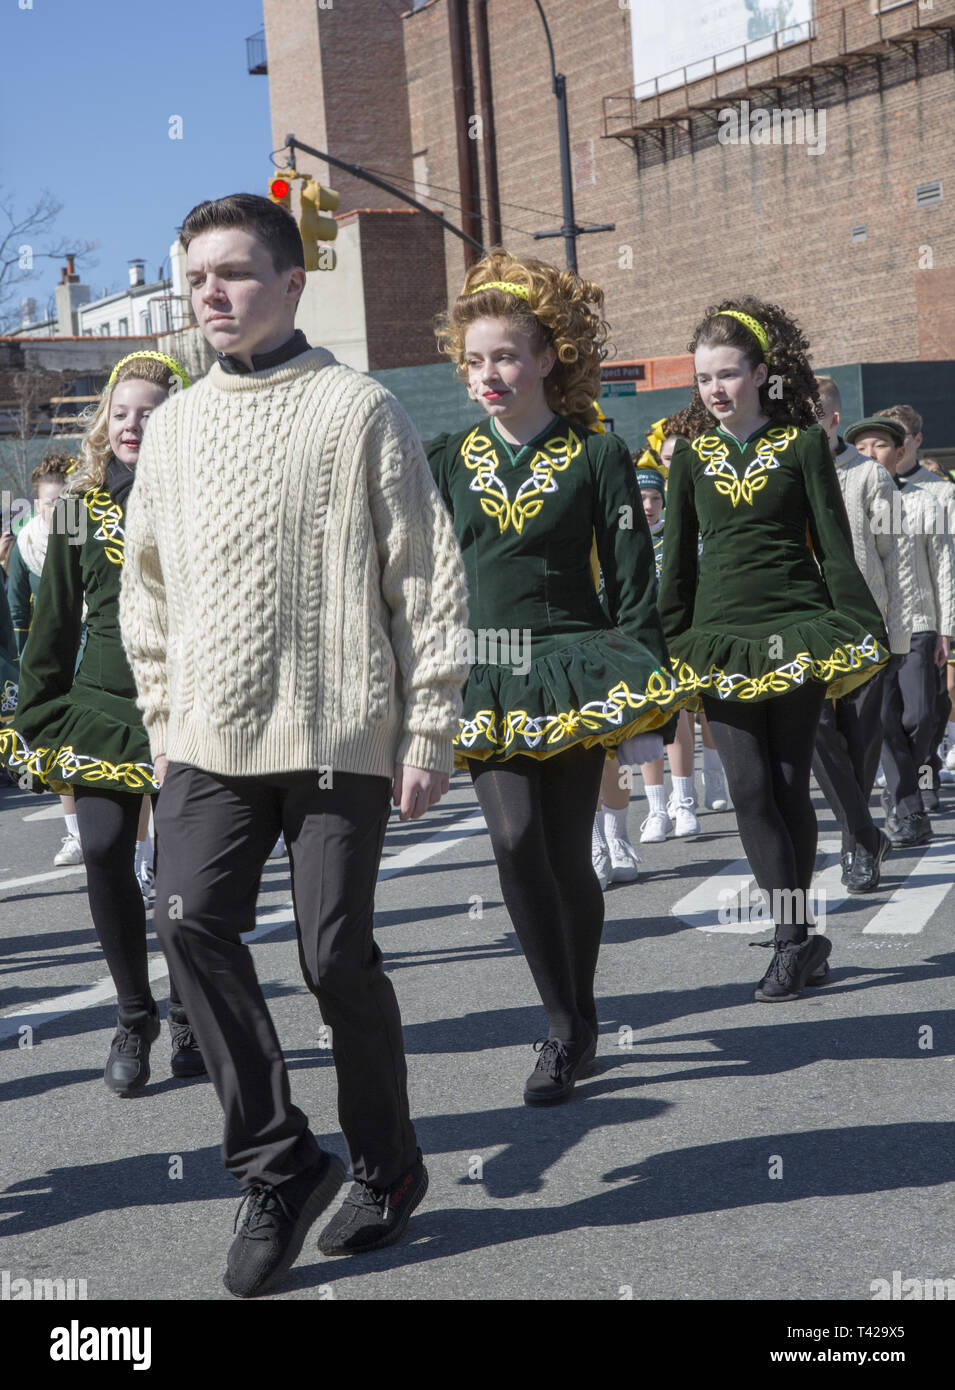 Local Saint Patrick's Day Parade is an annual event in the Park Slope Windsor Terrace neighborhood of Brooklyn, New York. Local Irish dance school students march and perform in the parade. Stock Photo